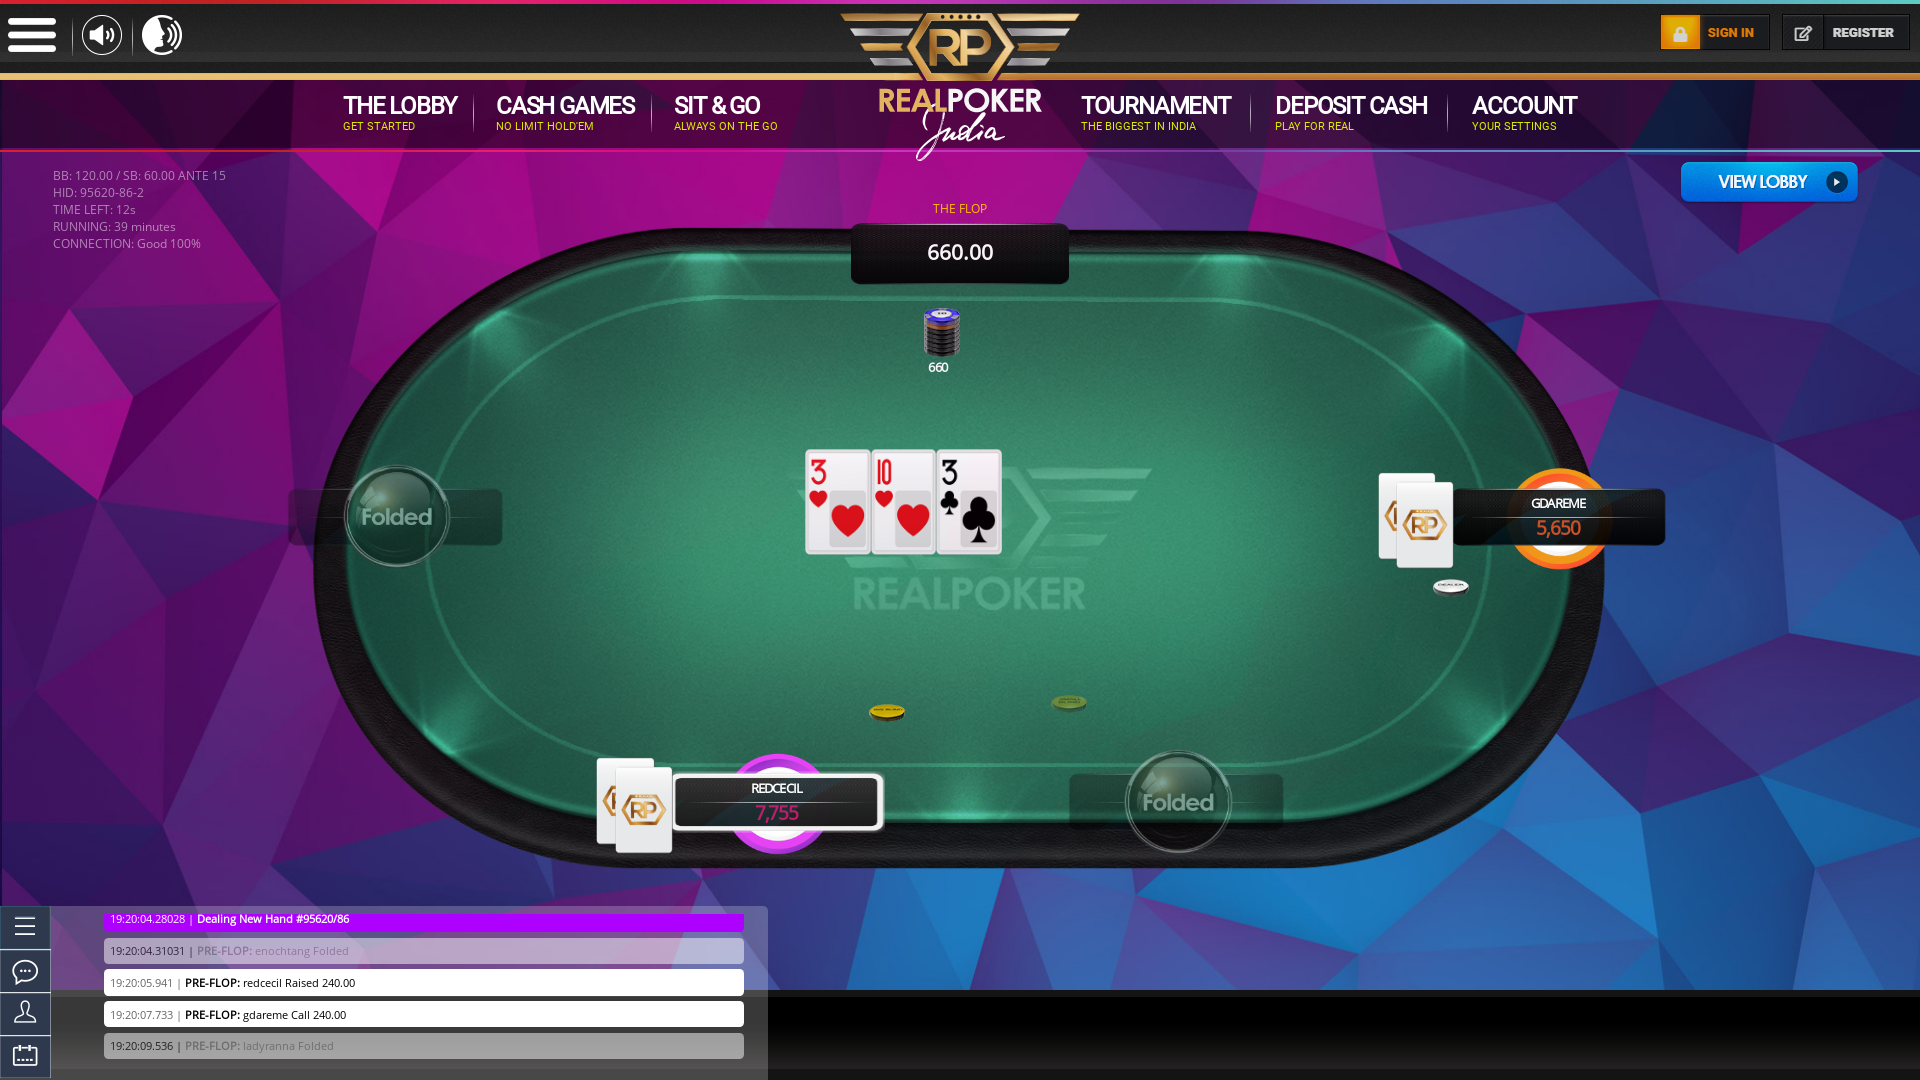 Bardez online poker game on a 10 player table in the 39th minute